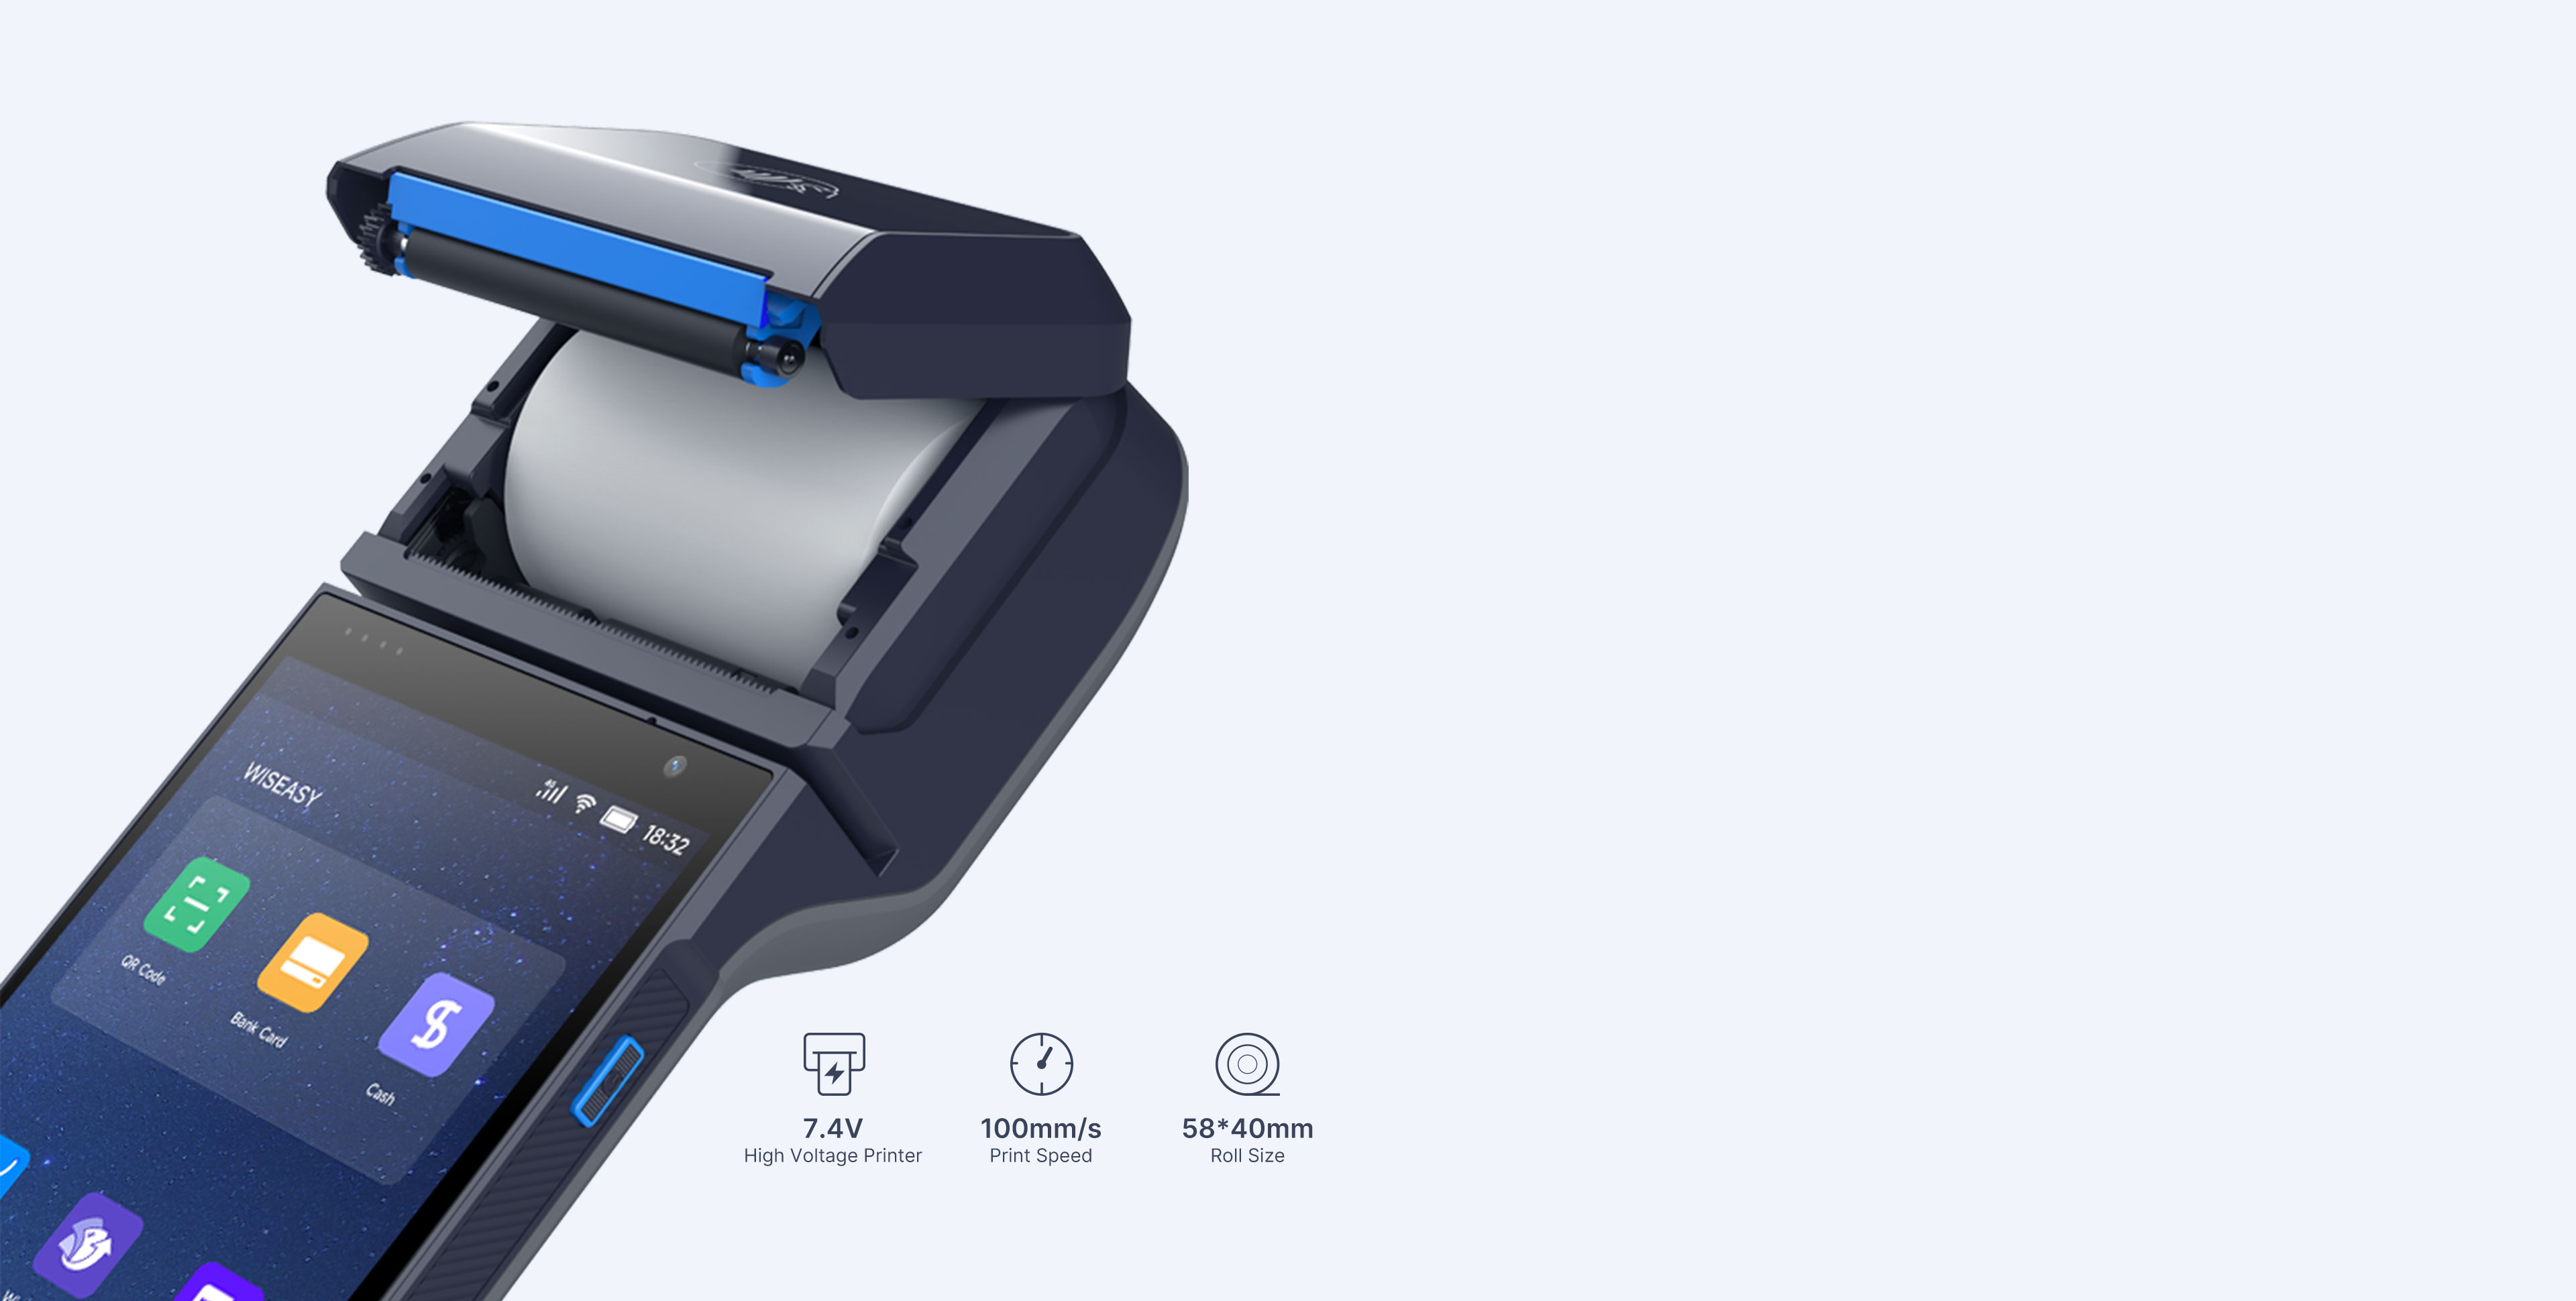 Reliable high-speed printer enables fast receipt printing